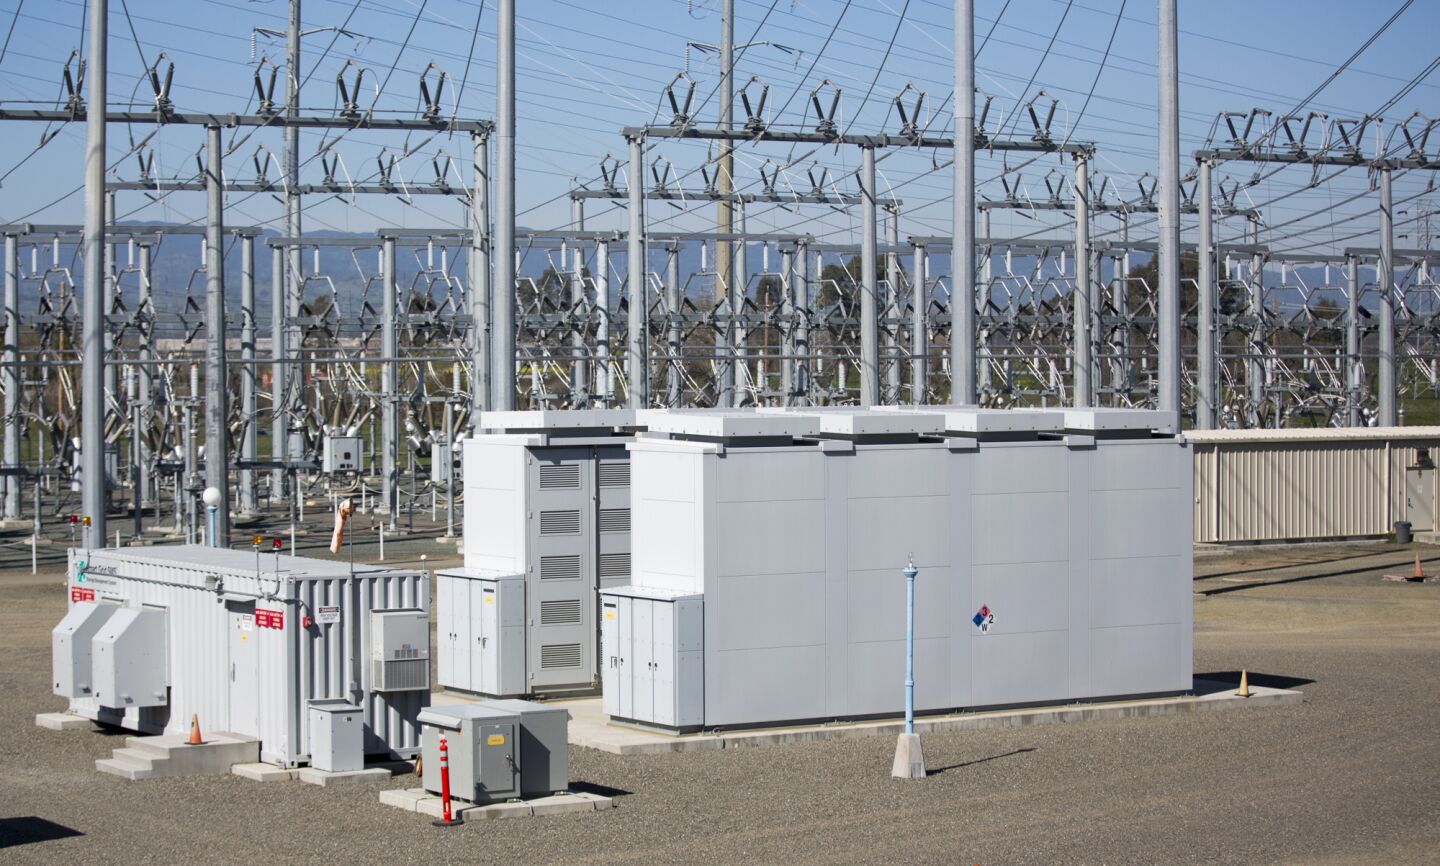 Experimental batteries are being tested as a means of storing and integrating renewable energy into California's power grid at the Vaca-Dixon PG&E substation in Vacaville, Calif.